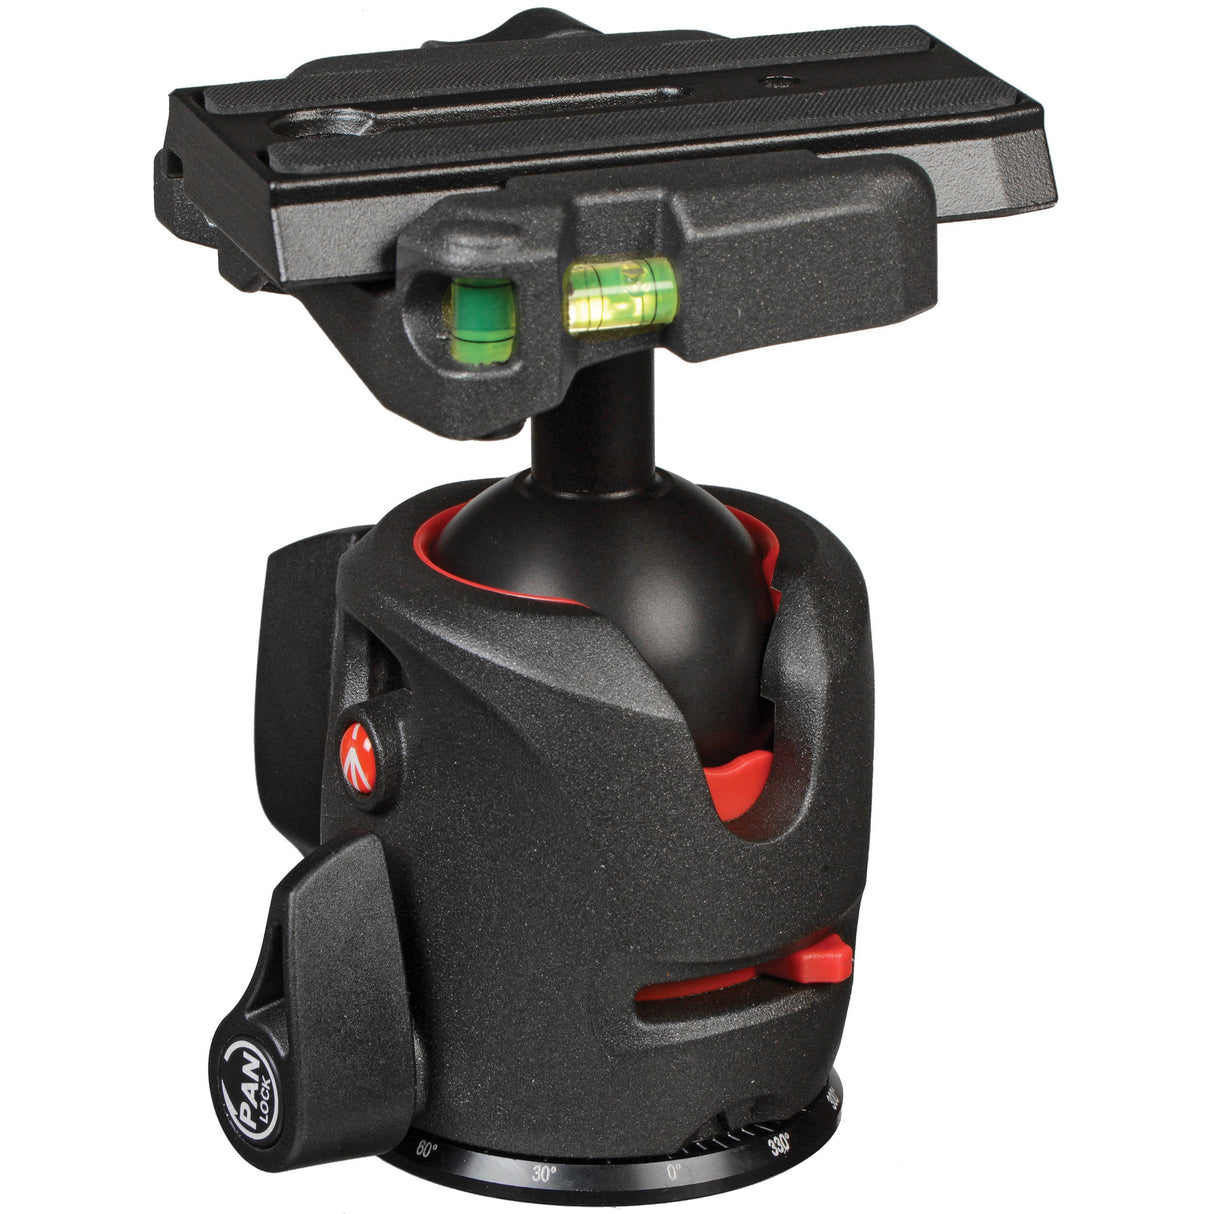 Manfrotto 054 Magnesium Ball Head with Q5 Quick Release